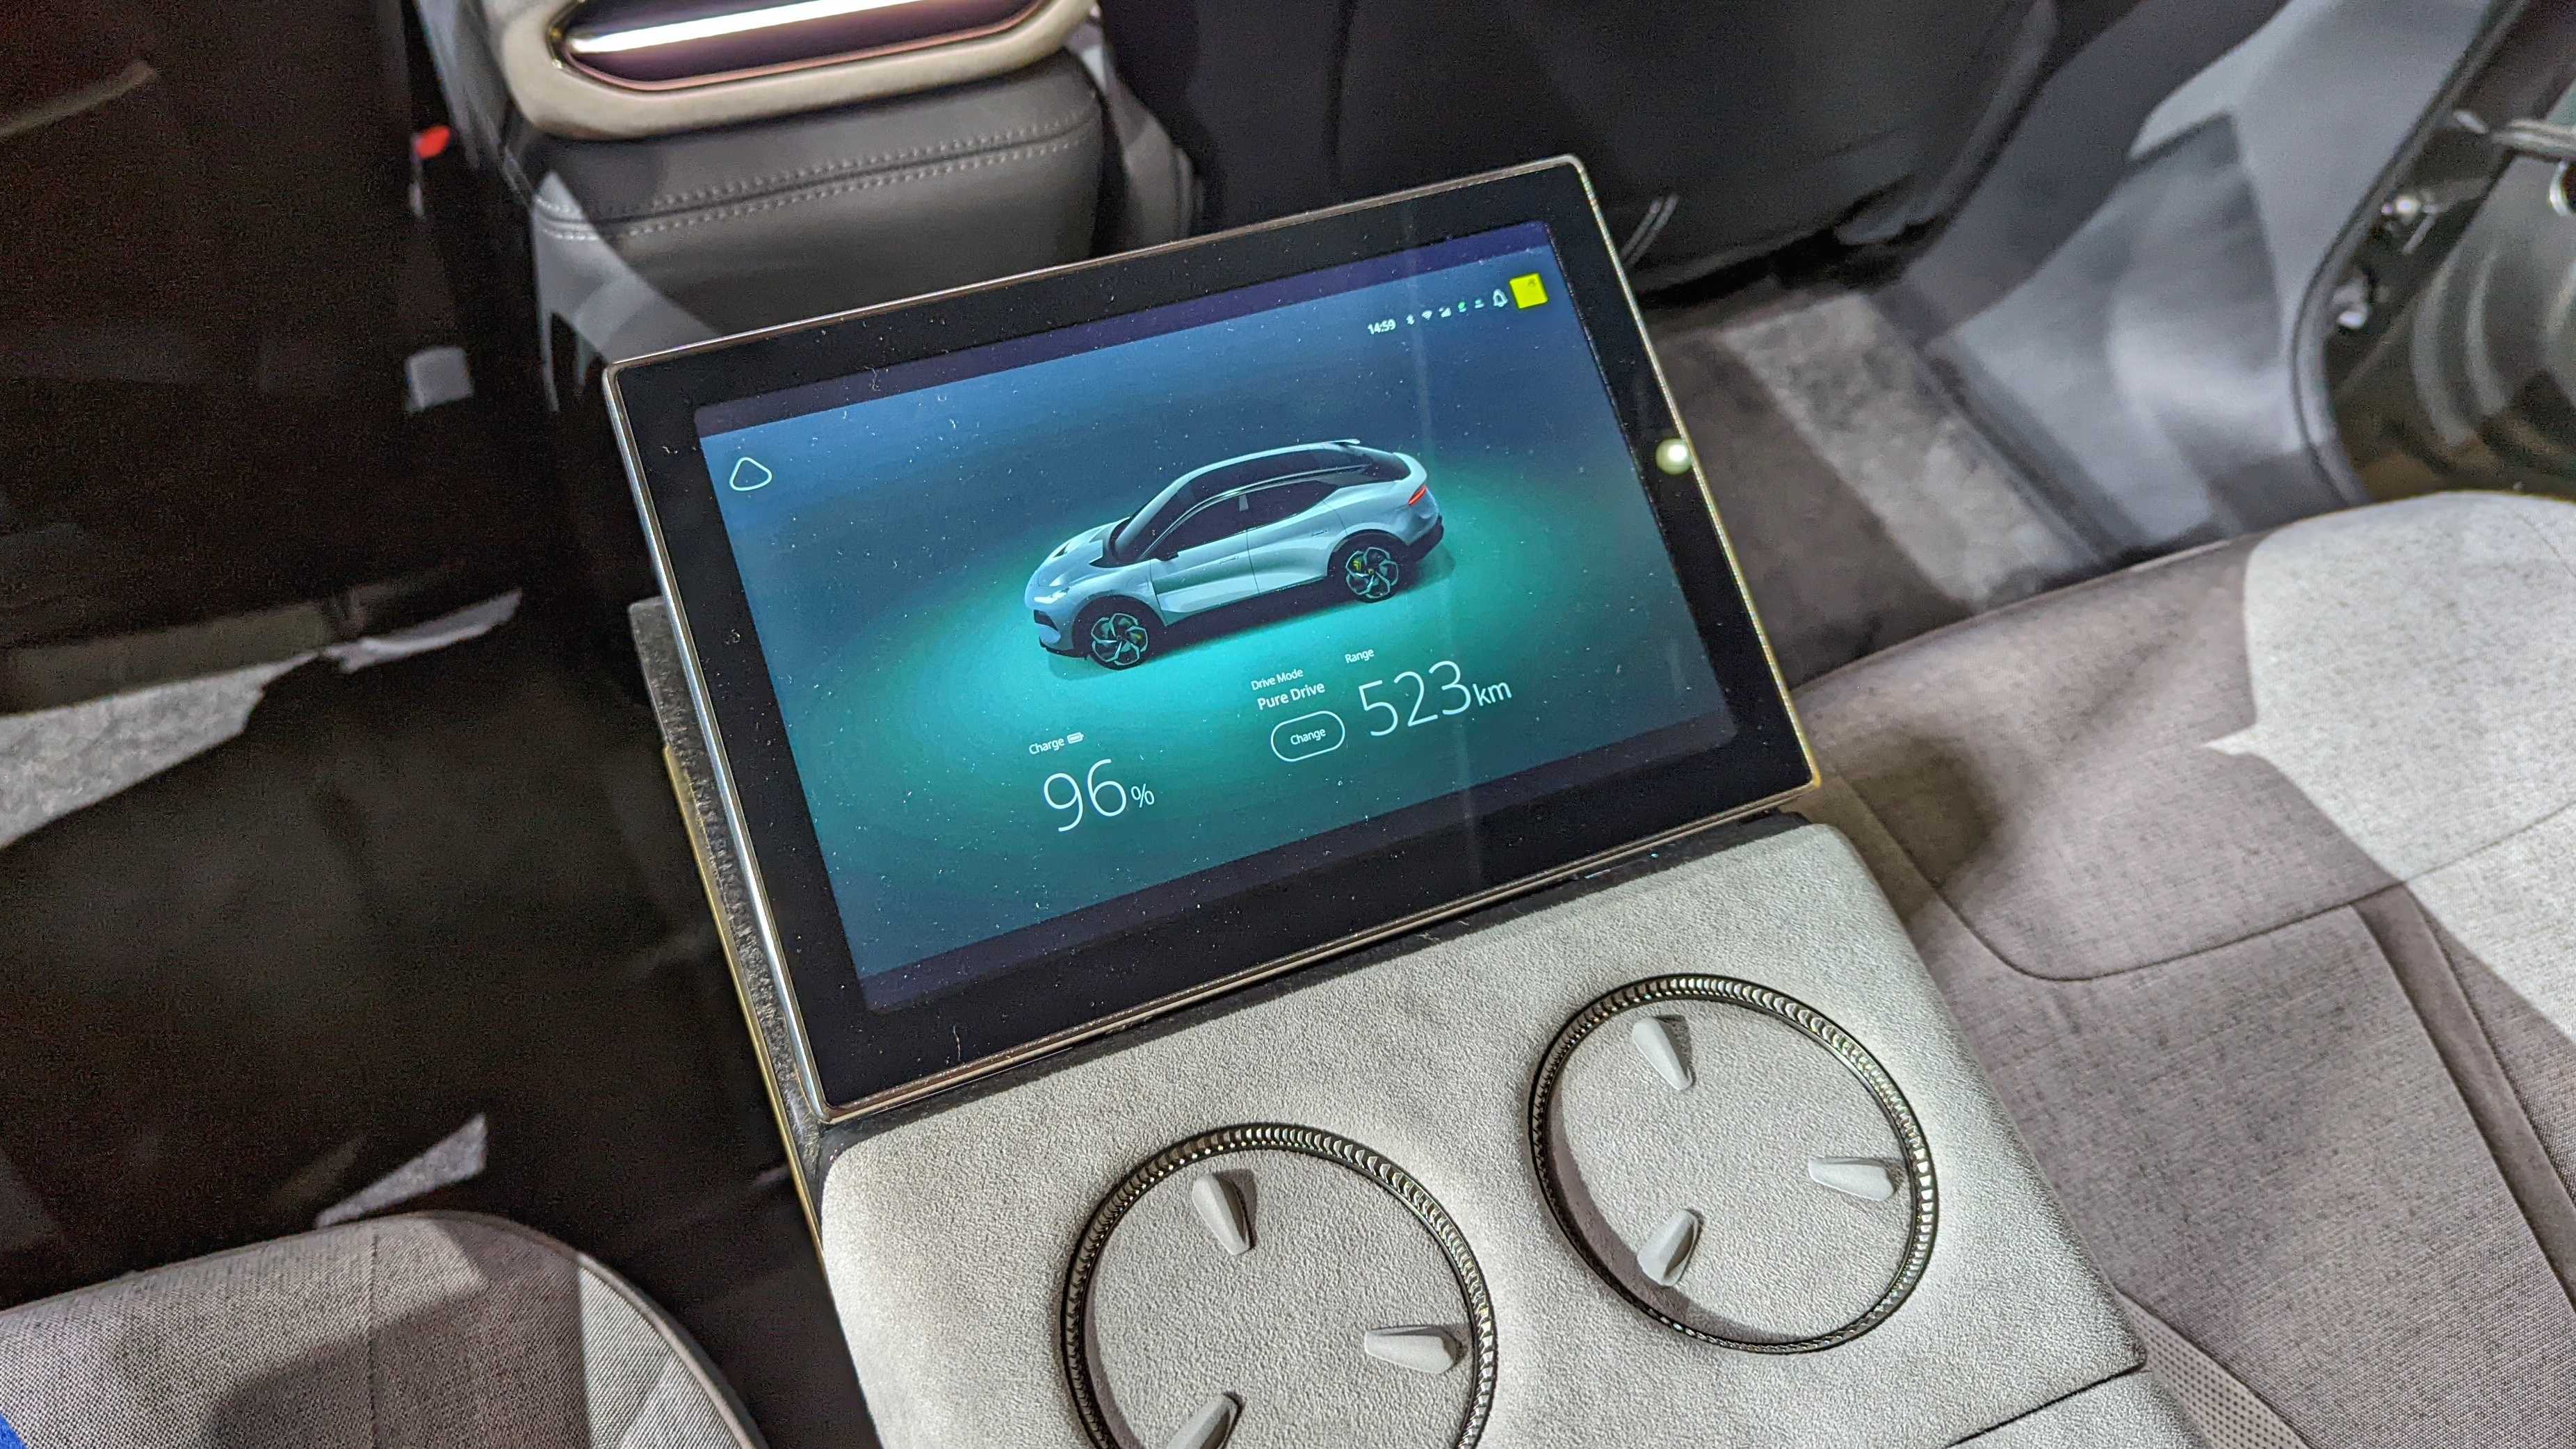 Close-up of the screen on the armrest between the rear seats of the Lotus Eletre